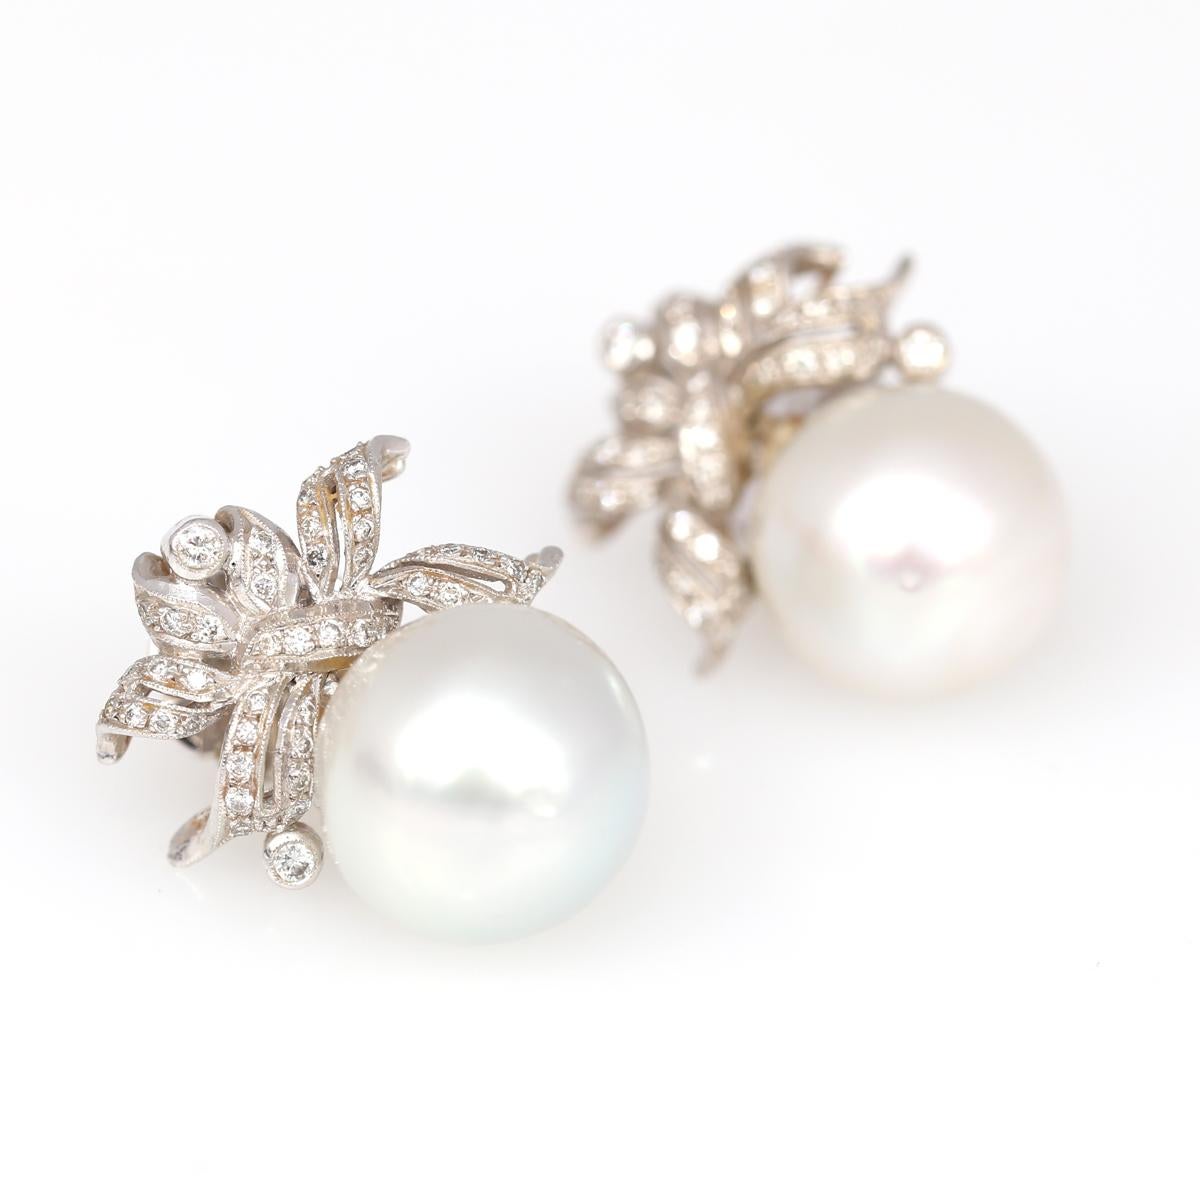 Fine 15mm South Sea White Pearls and Diamonds Earrings. Delicate and very stylish jewelry item. The sophisticated ribbon set with fine Diamonds is holding a fine 15mm round white pearl. The pearl is not fixed tightly so it moves a little bit with